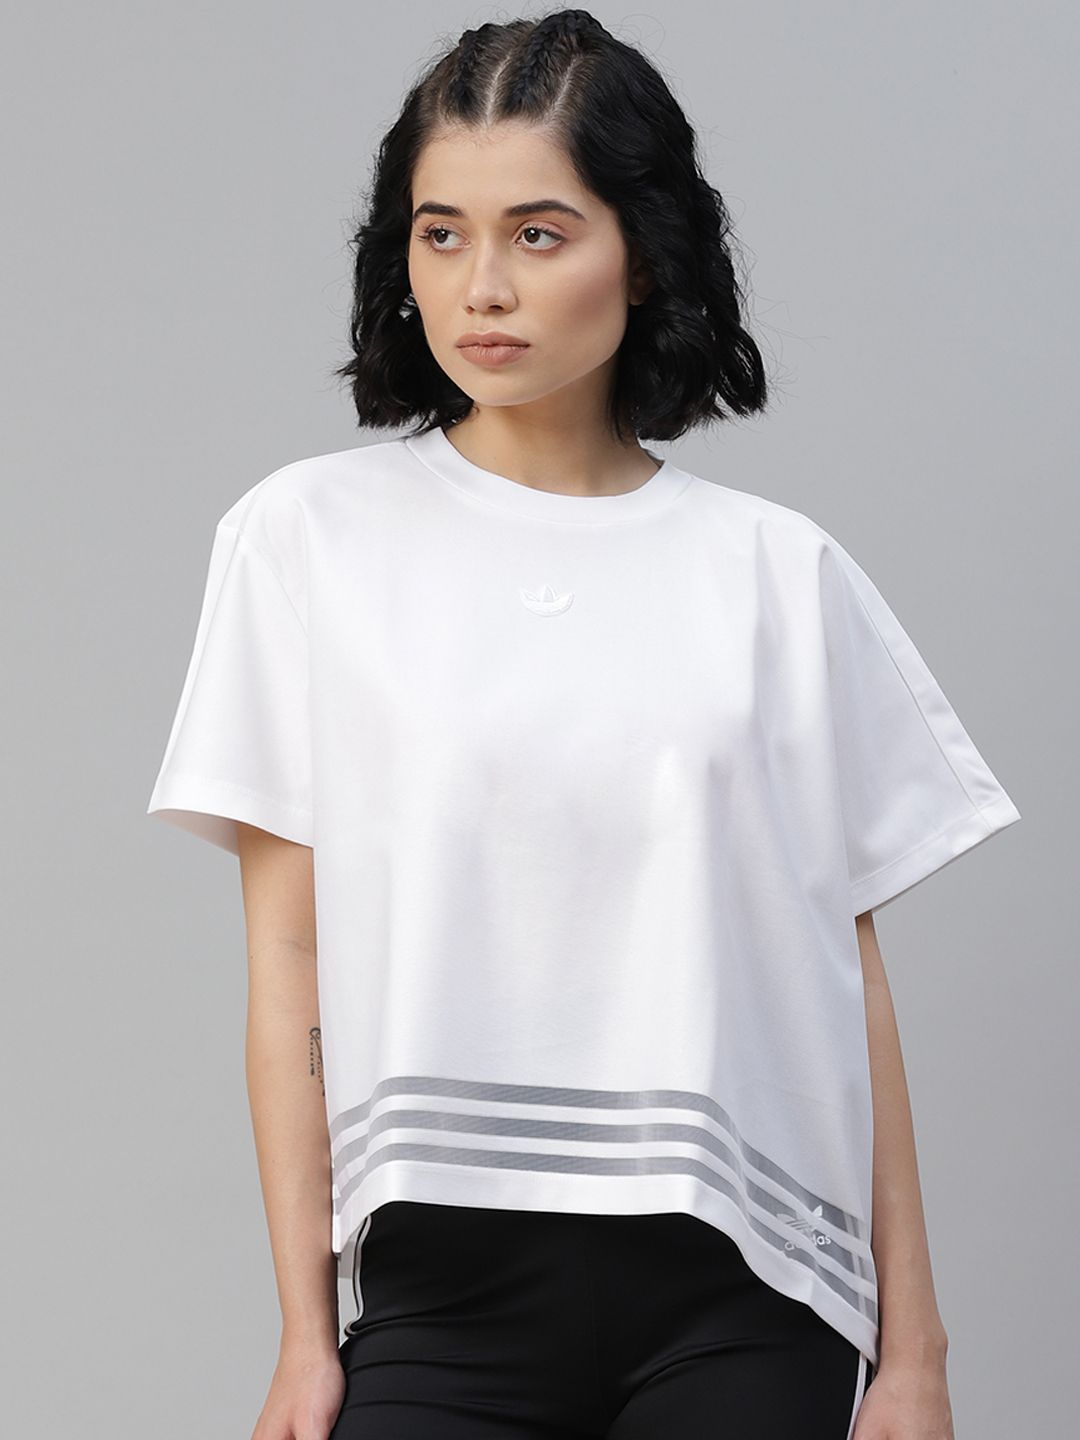 ADIDAS Originals Women White Asymmetrical Cut Striped Detail Sustainable T-shirt Price in India